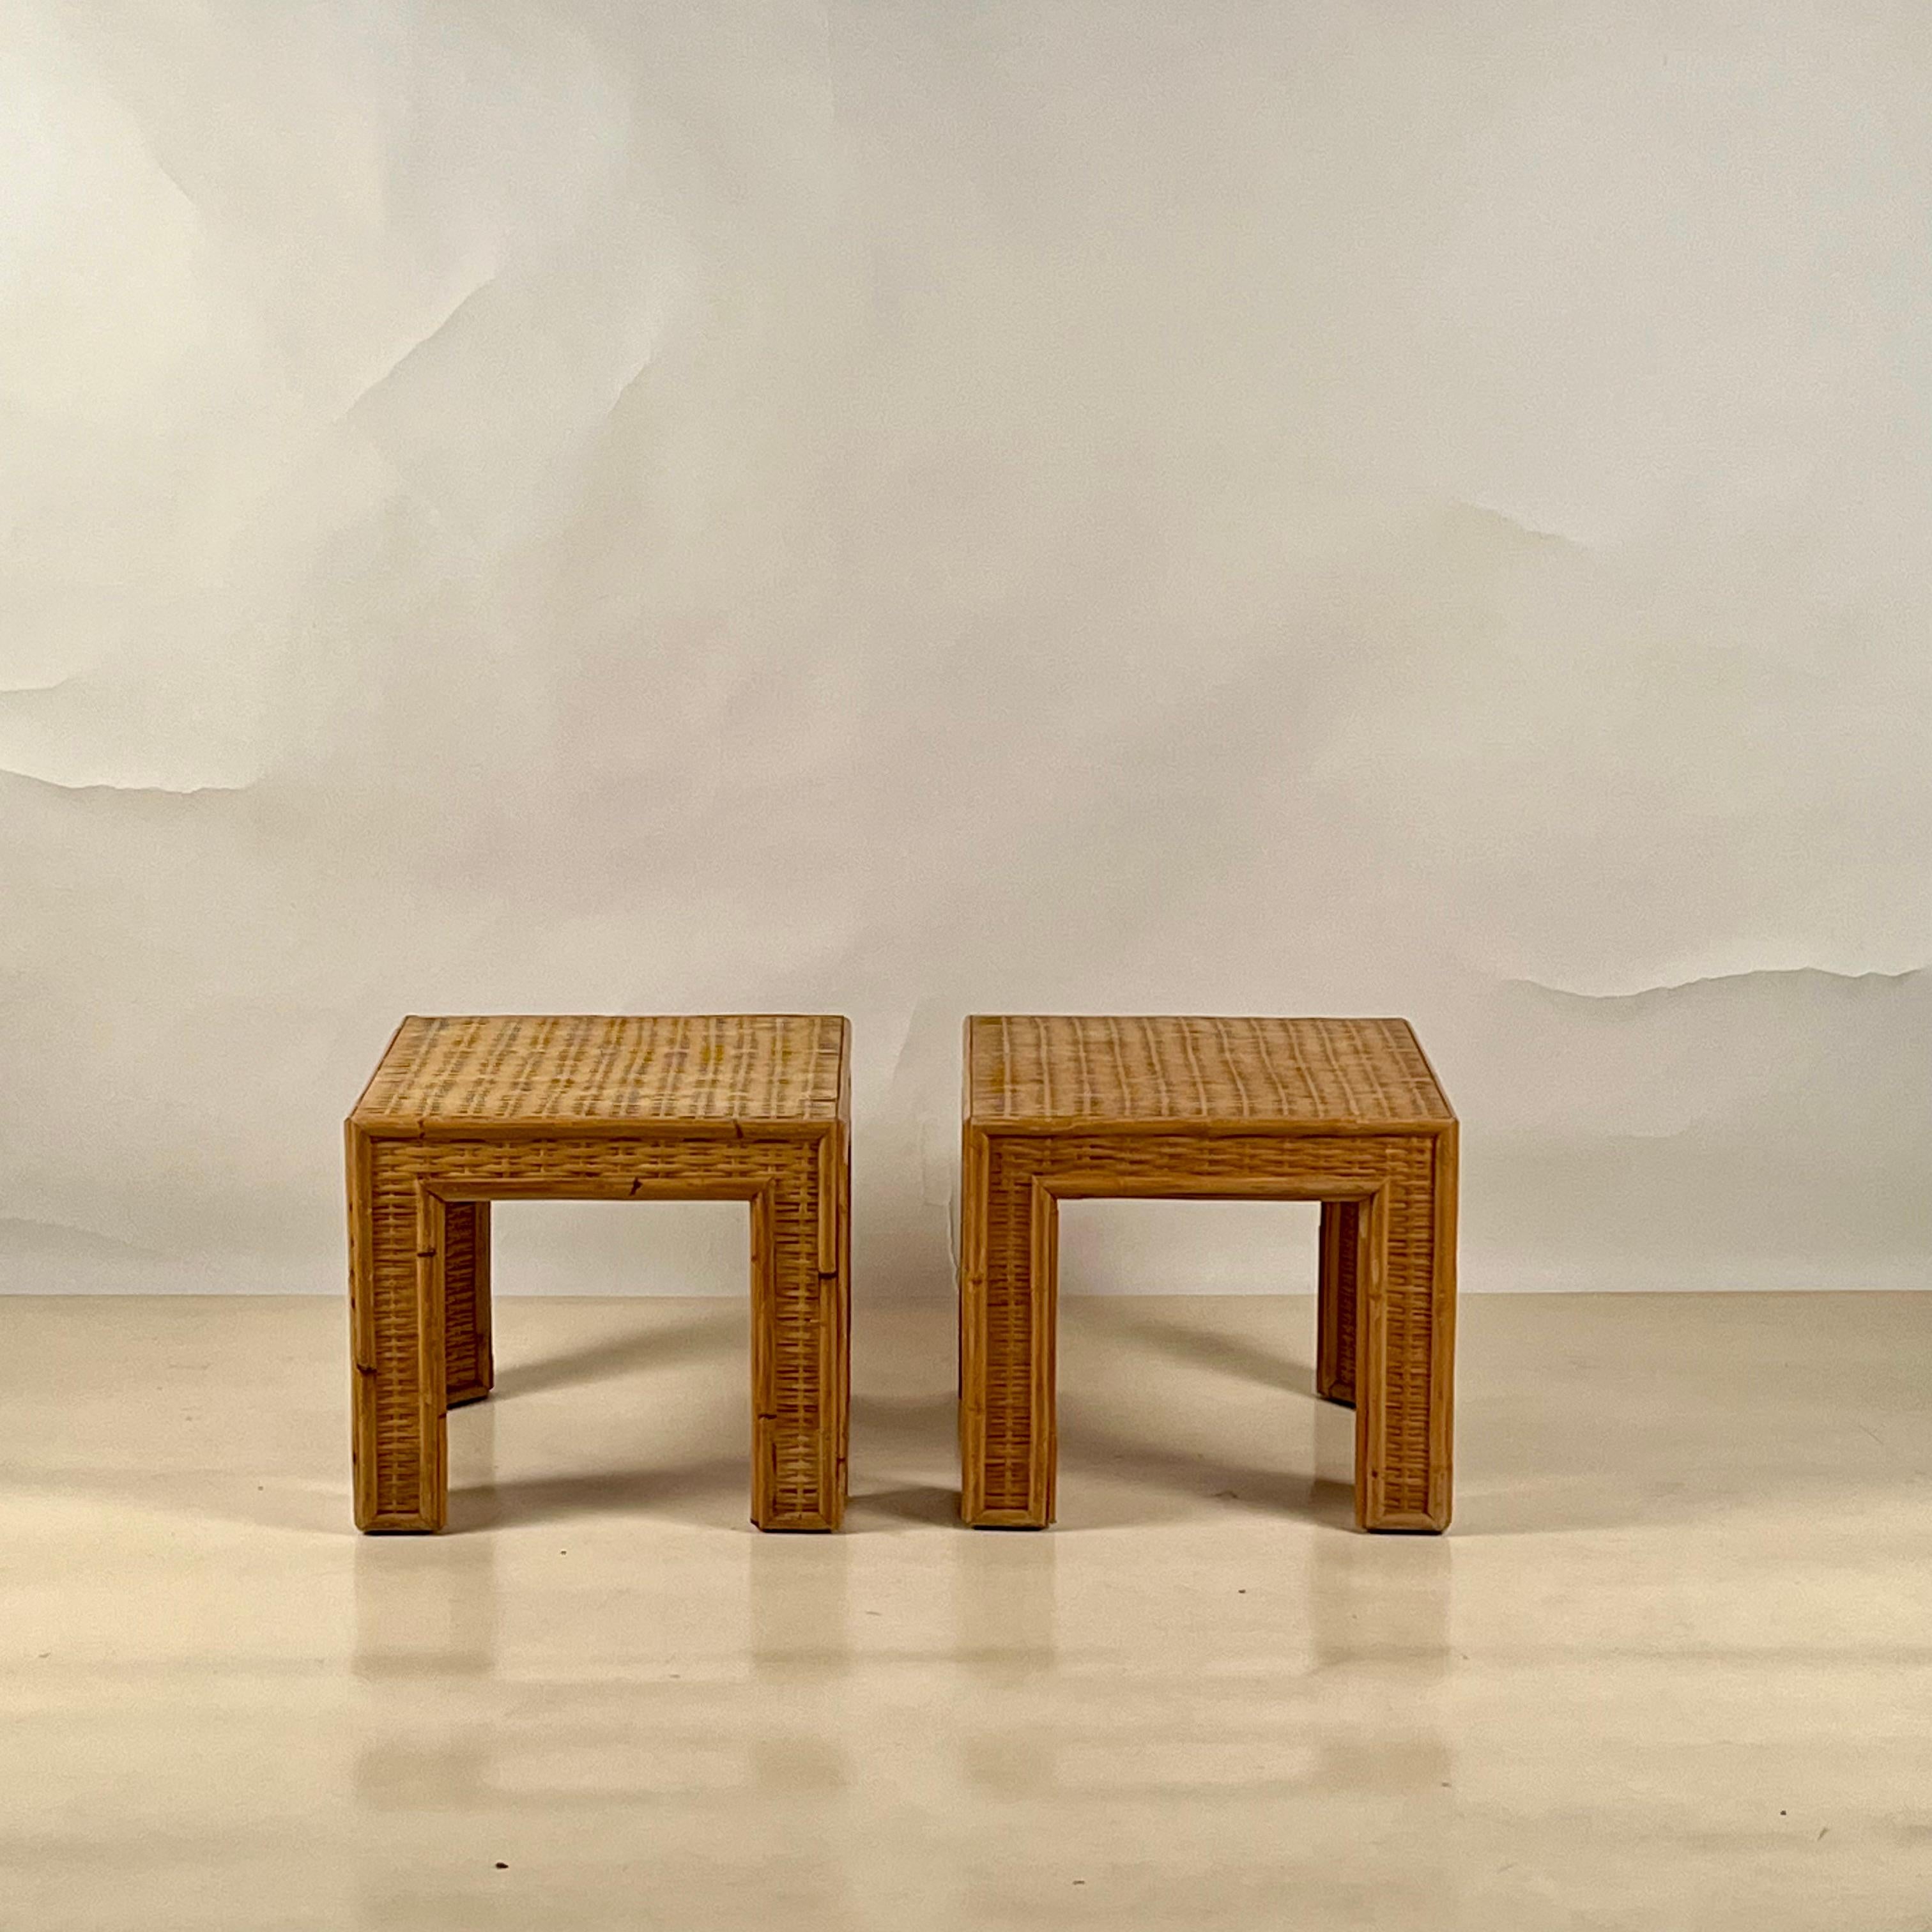 Pair of thick custom-made rattan and wicker end tables.

Sold as a pair.